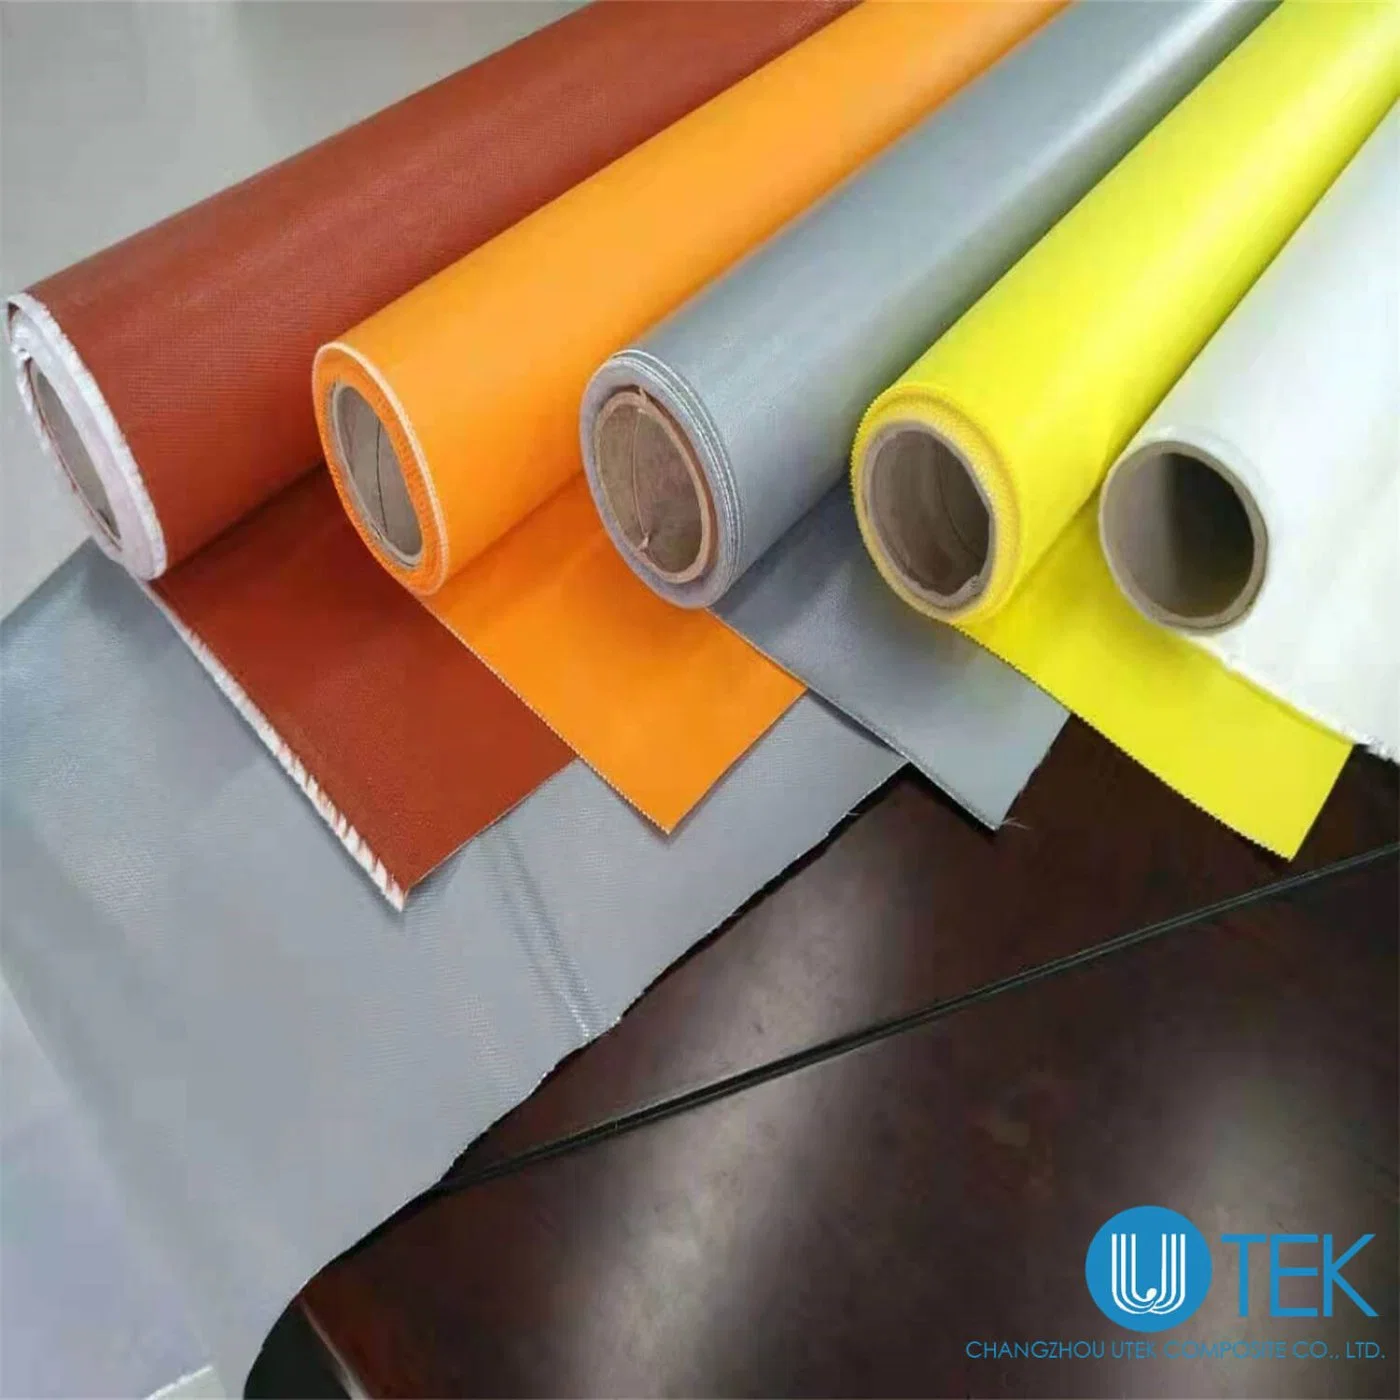 Thermal Insulation Fiberglass Silicon/Silicone Coating Fabric Cloth for Pipes